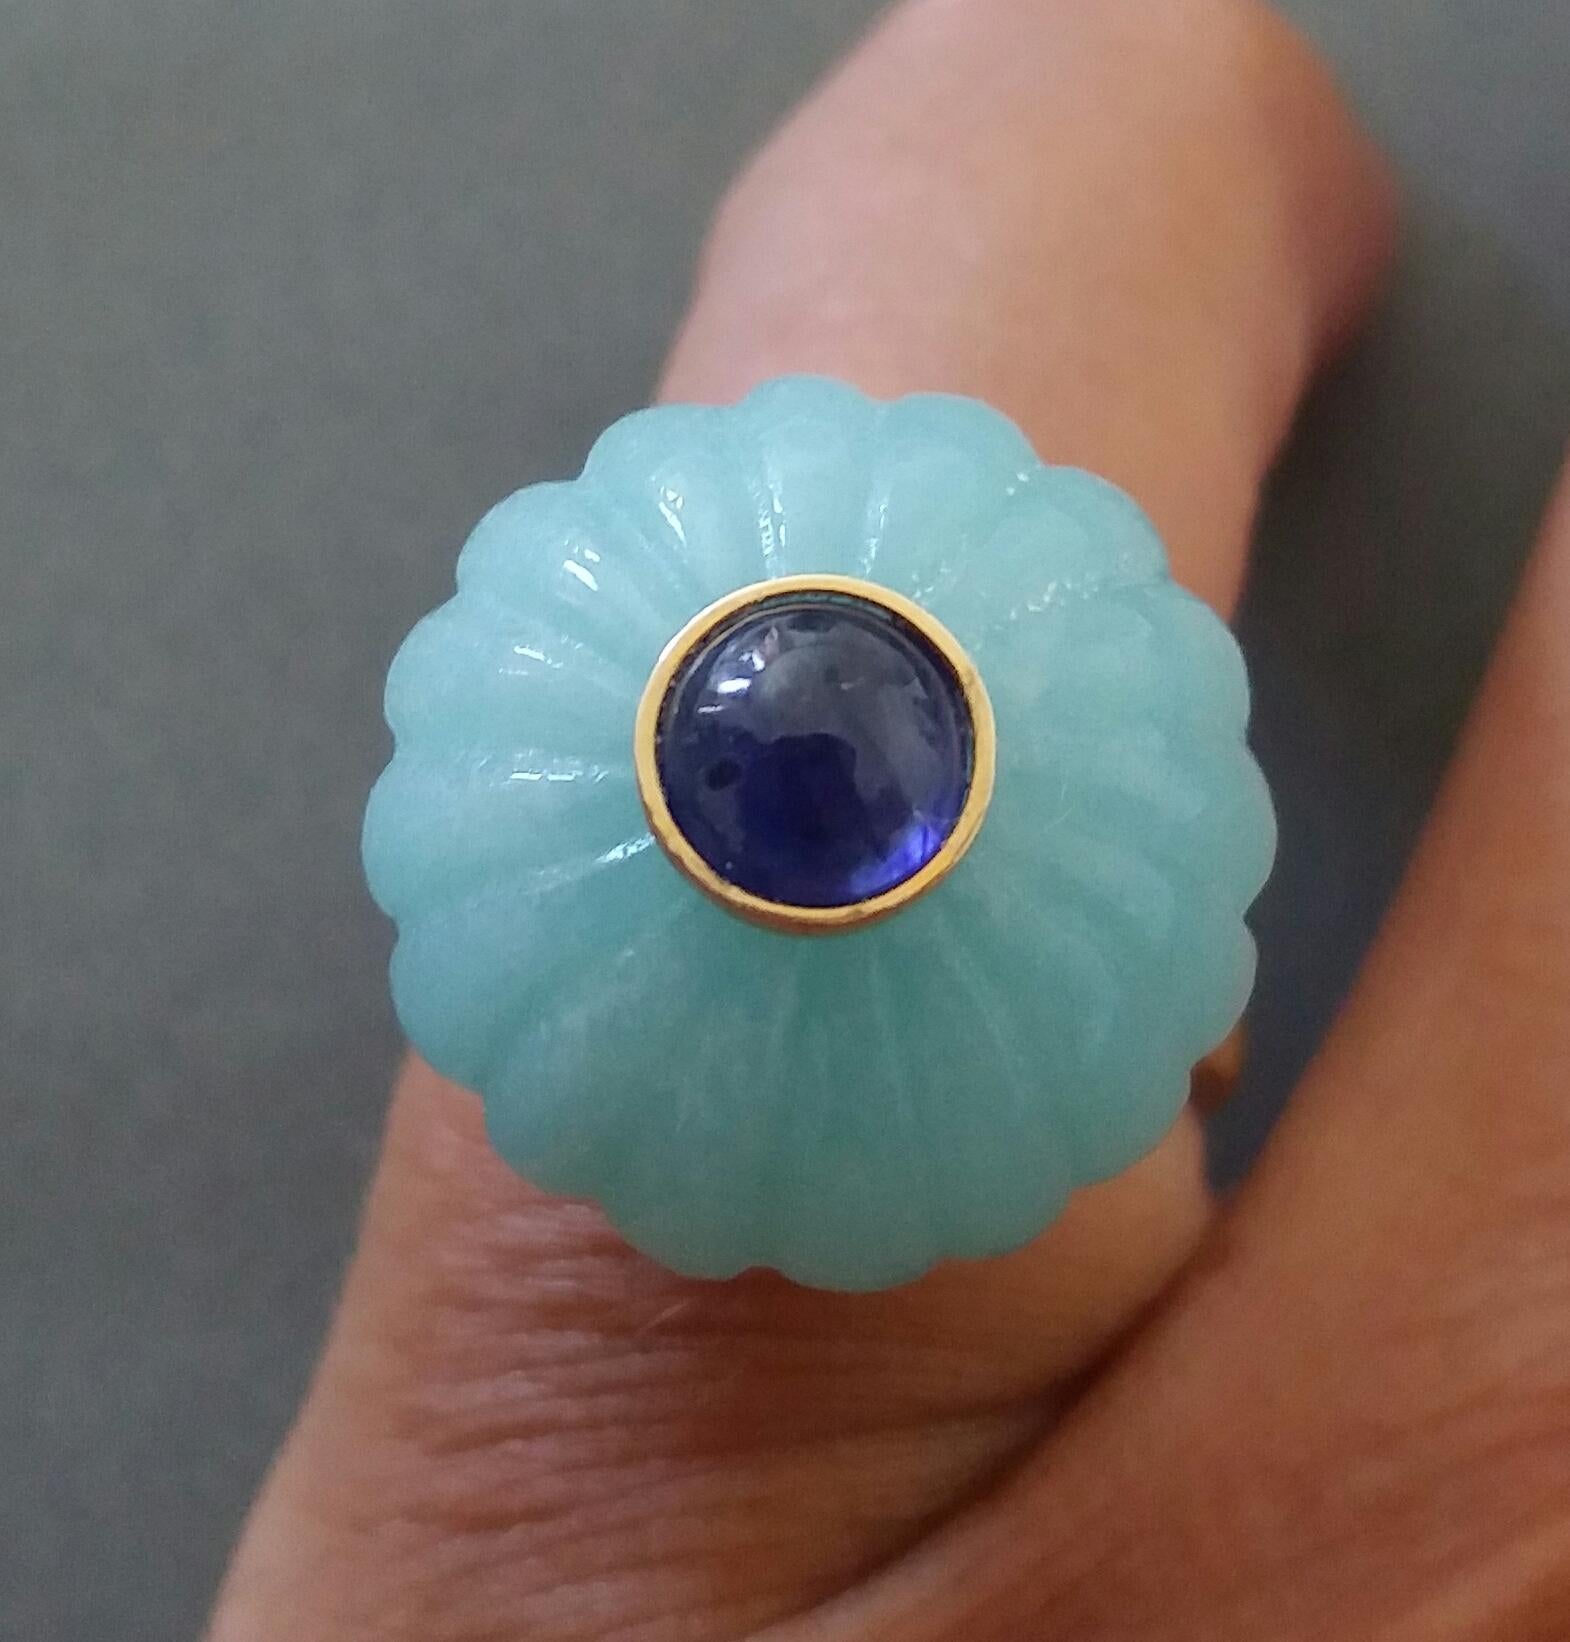 Melon cut Blue Amazonite Round Bead of 21 mm. in diameter and 16 mm. thick with in the center a round Blue Sapphire cabochon of 7 mm. in diameter is mounted on top of a 14 Kt. yellow gold shank.
In 1978 our workshop started in Italy to make